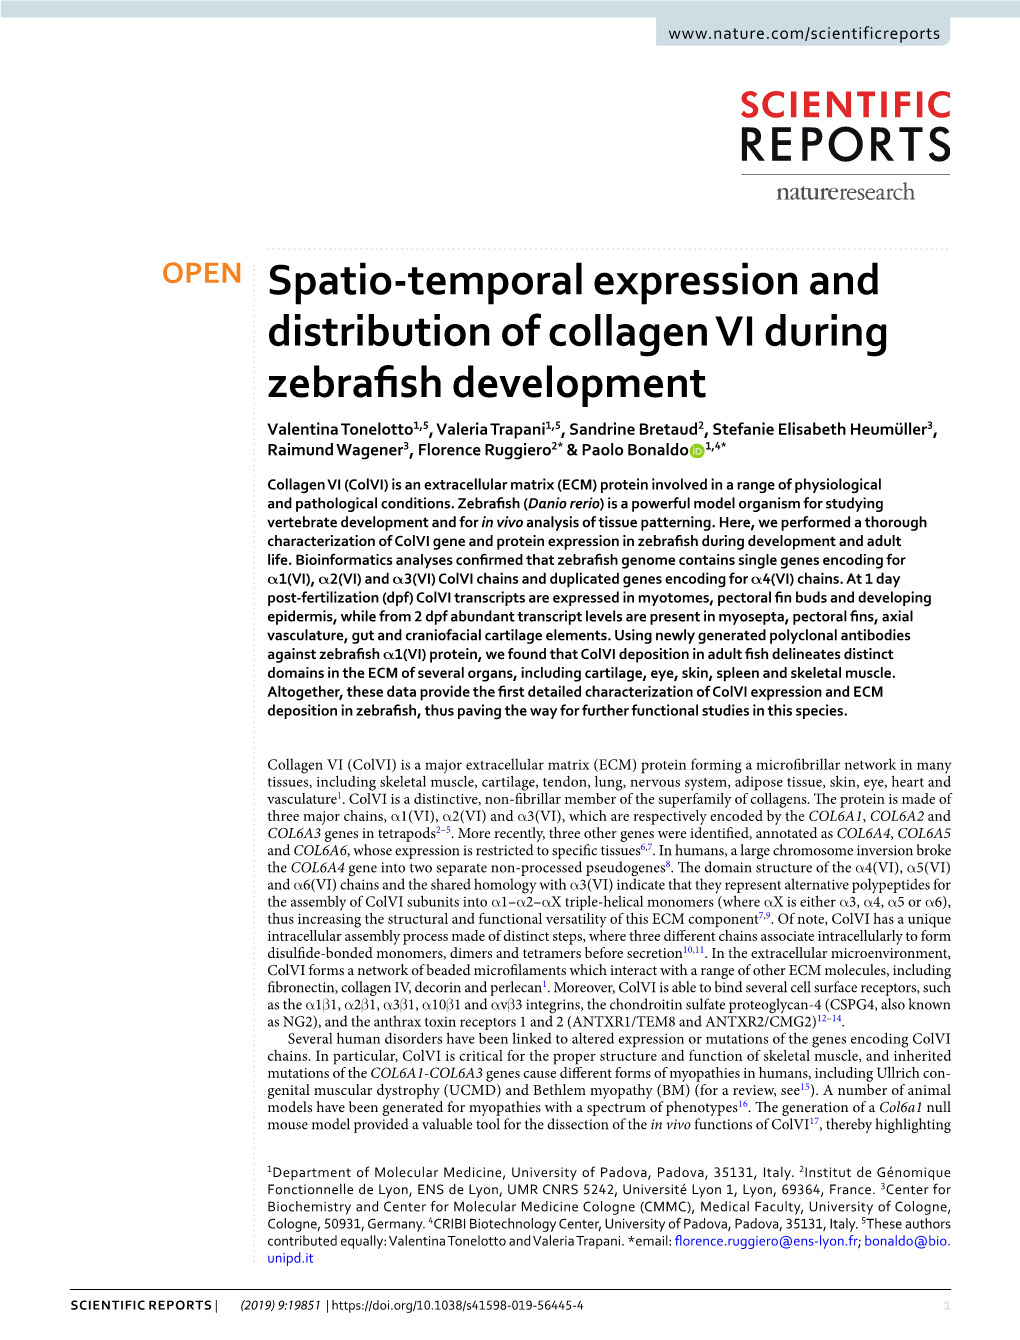 Spatio-Temporal Expression and Distribution of Collagen VI During